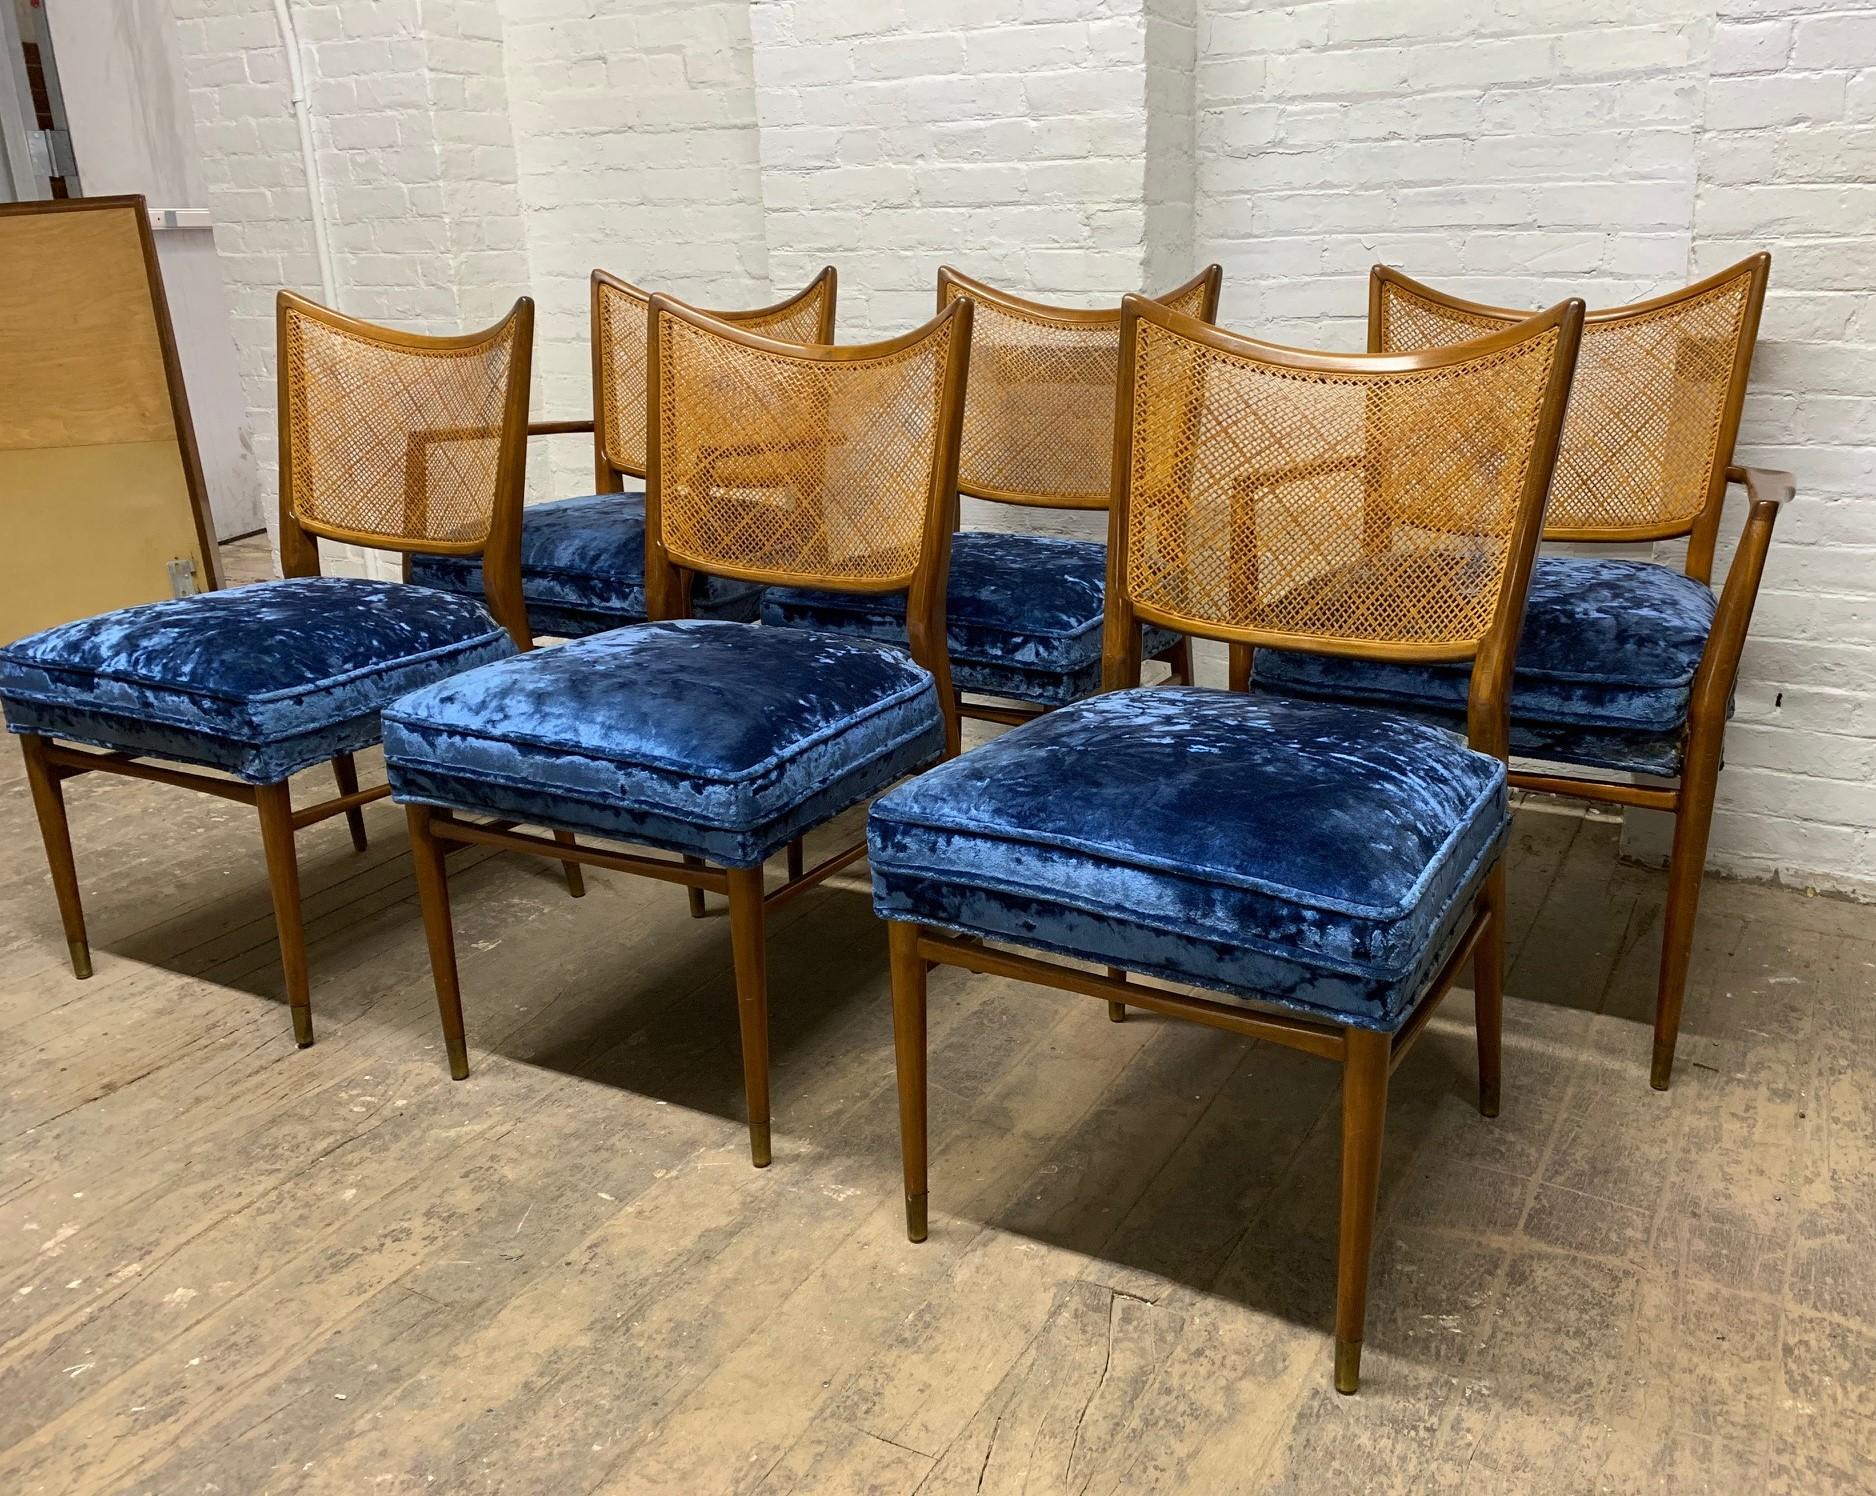 Set of 6 Erno Fabry walnut and cane back dining chairs. The chairs are walnut with caned backs. Seats are blue velvet. There are two sculptural arm chairs in this set.  Table not included. 

Arms: 34H x 24W x 23.75D Arm height: 25H. Seat height: